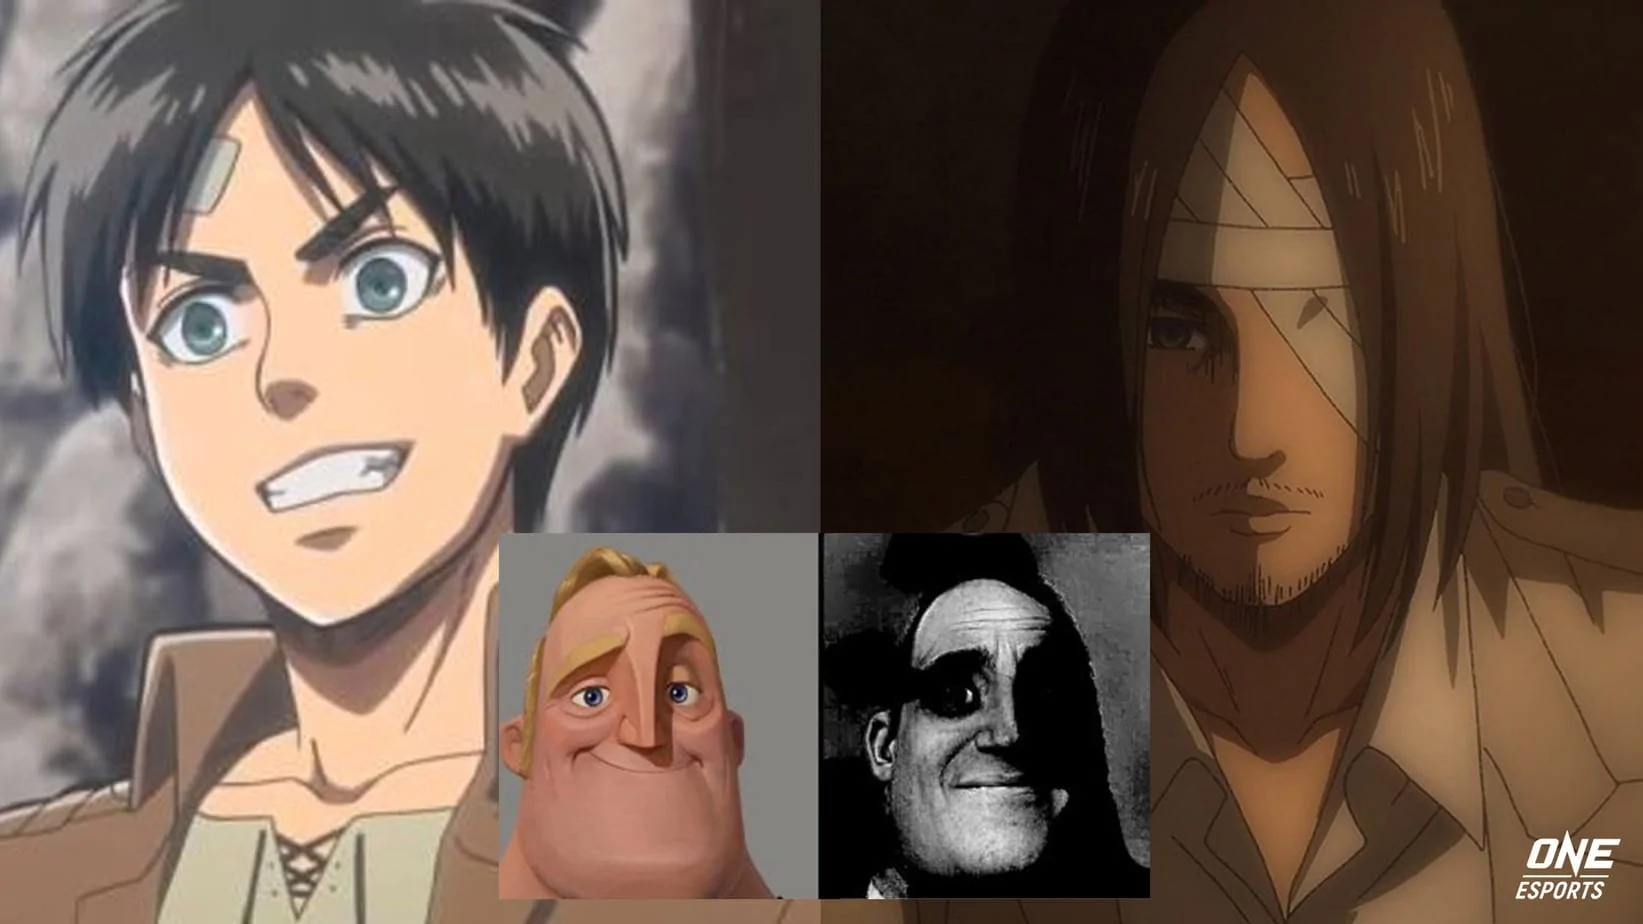 Attack on Titan The Final Season Episode 1 Becomes The Most Viewed